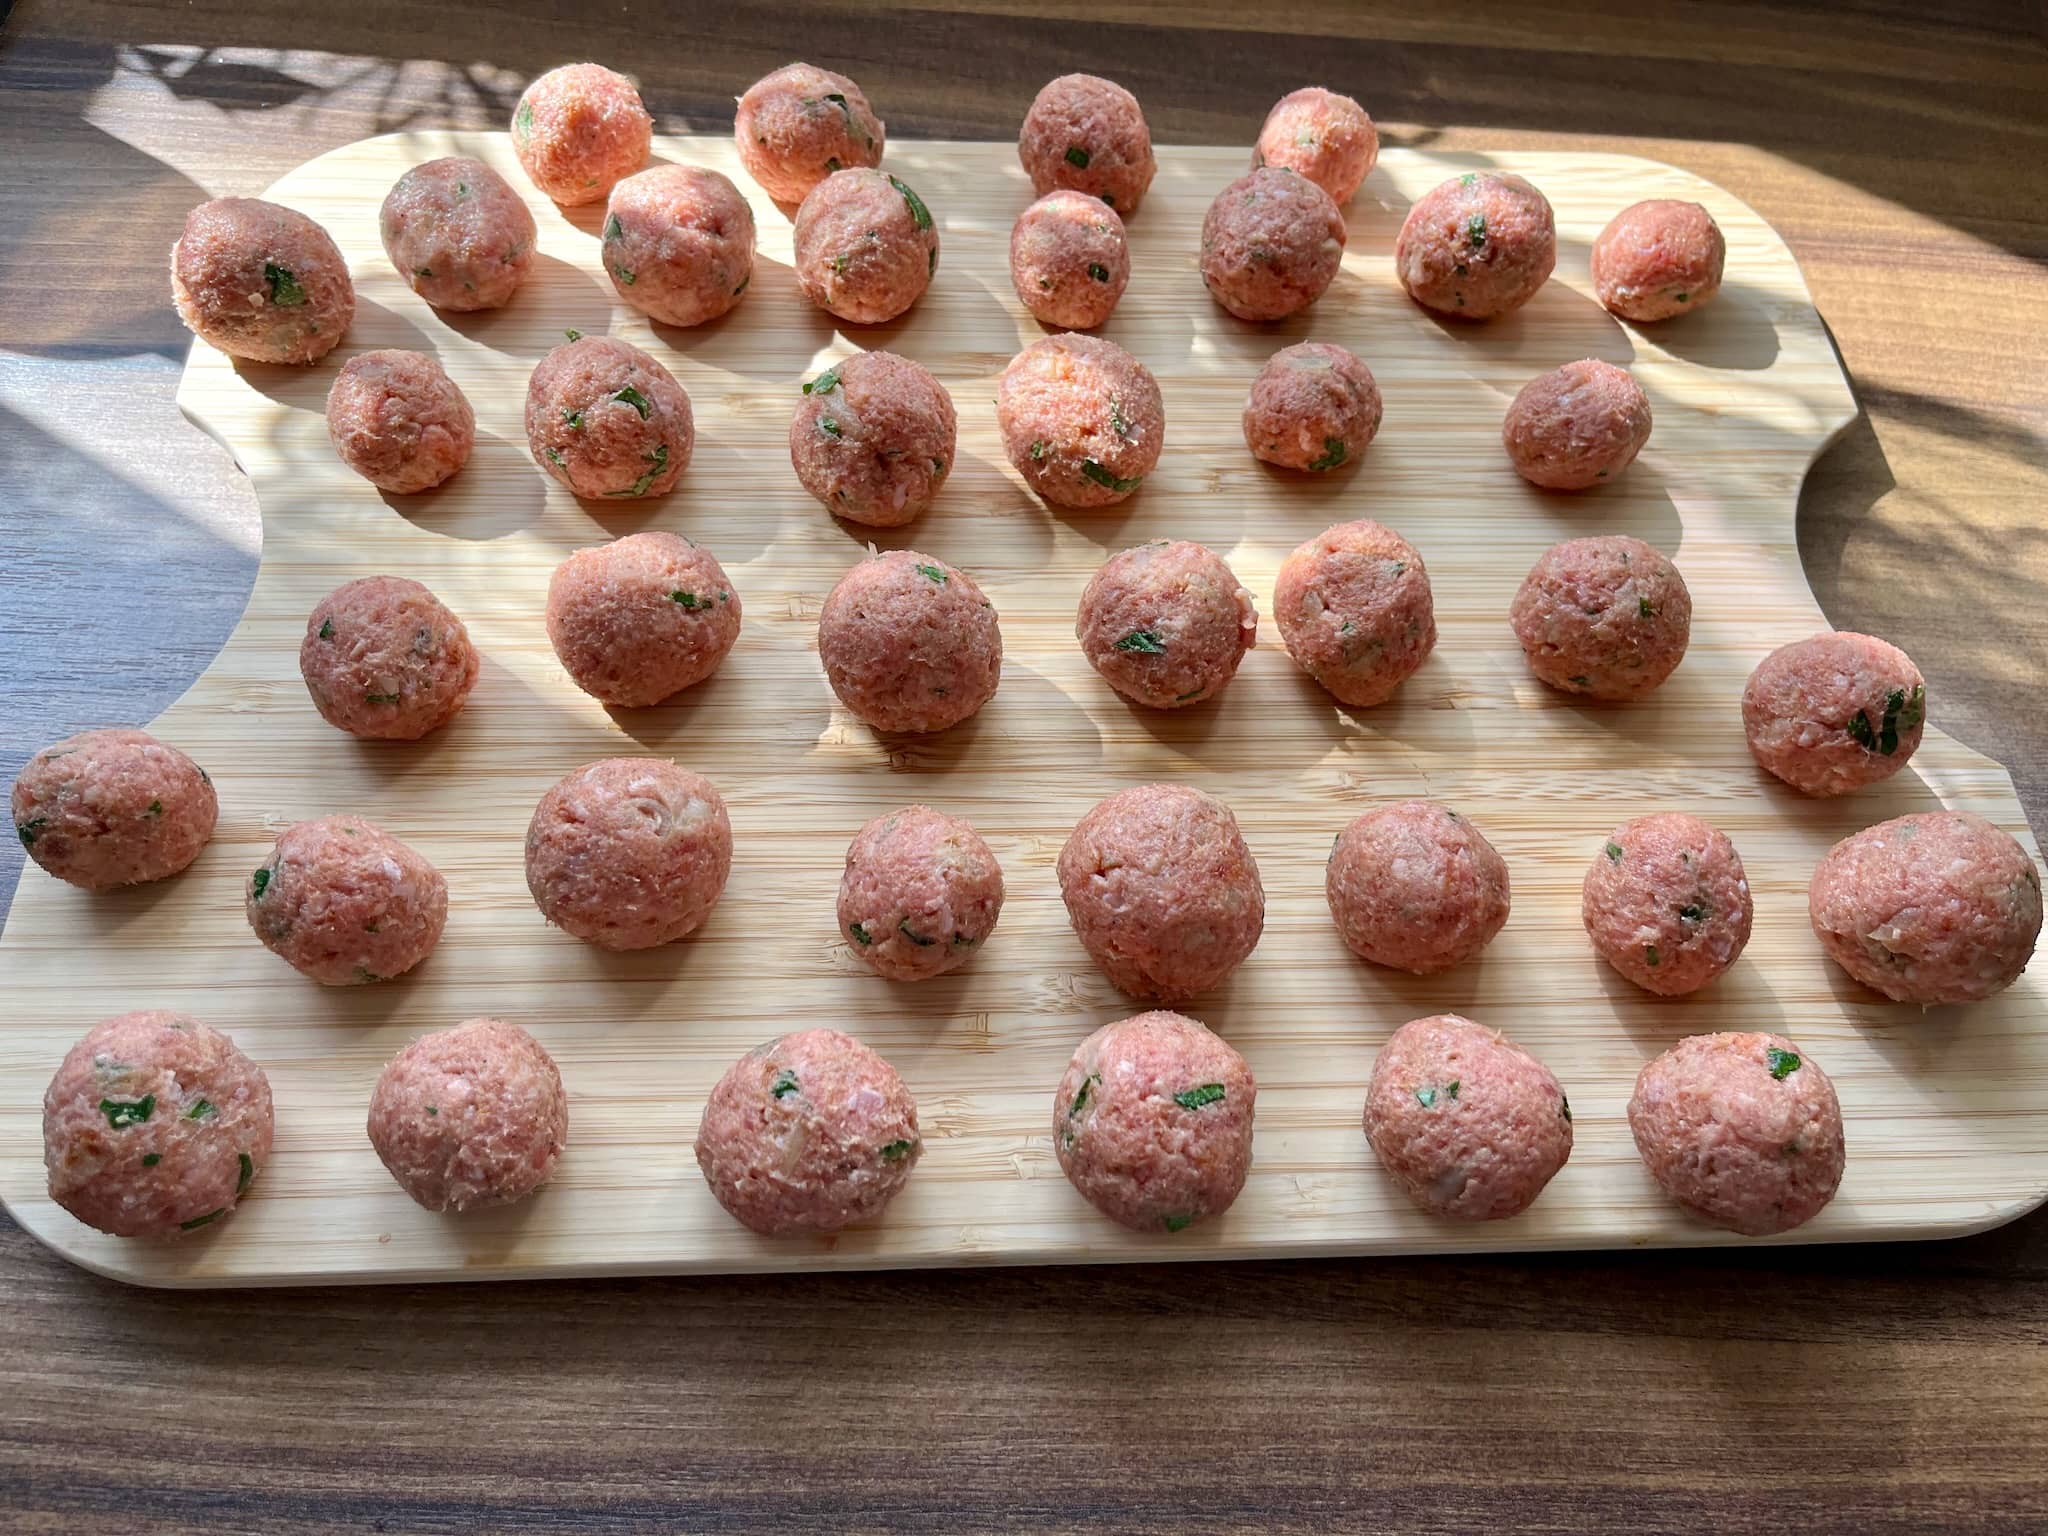 Meatballs balls on a chopping board before frying